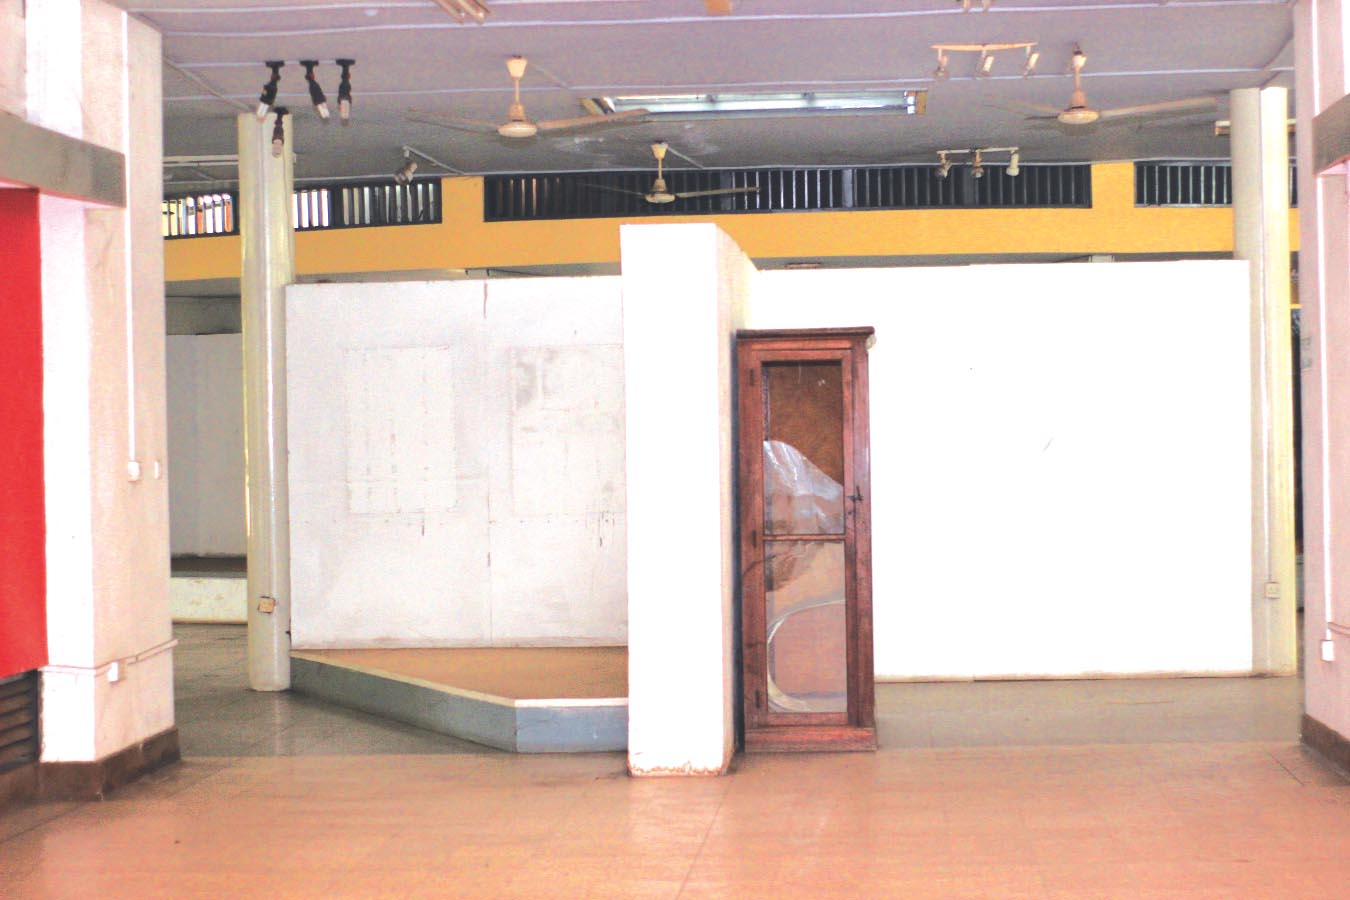 • The gallery at the National Museum in Accra has remained closed for two years for renovation